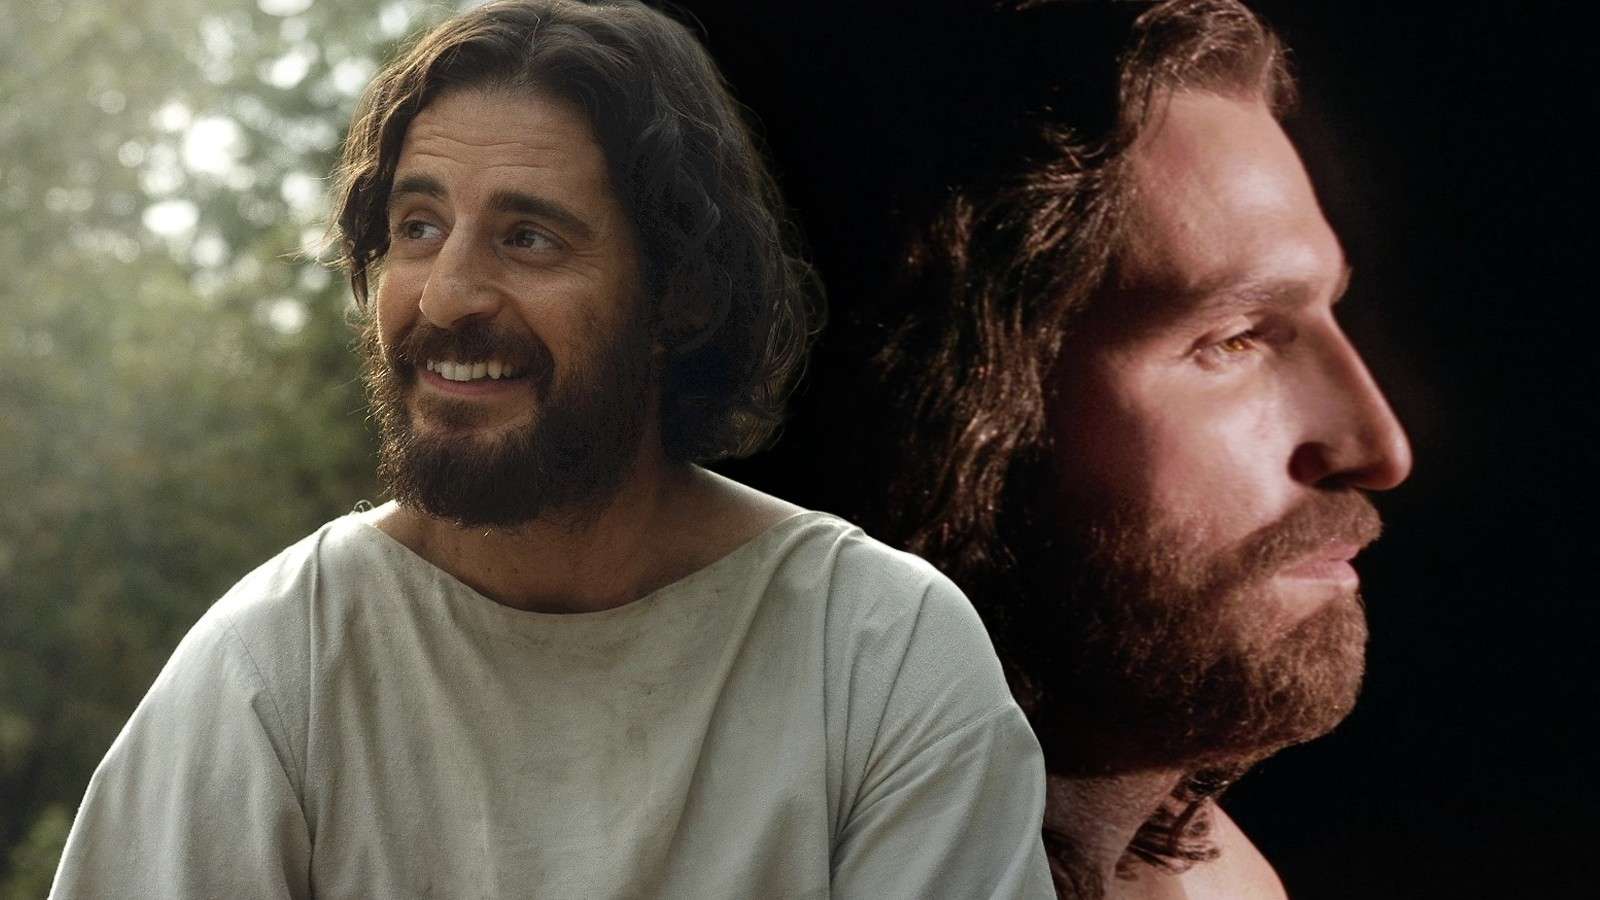 Jonathan Roumie as Jesus in The Chosen and Jim Caviezel in The Passion of the Christ's resurrection scene